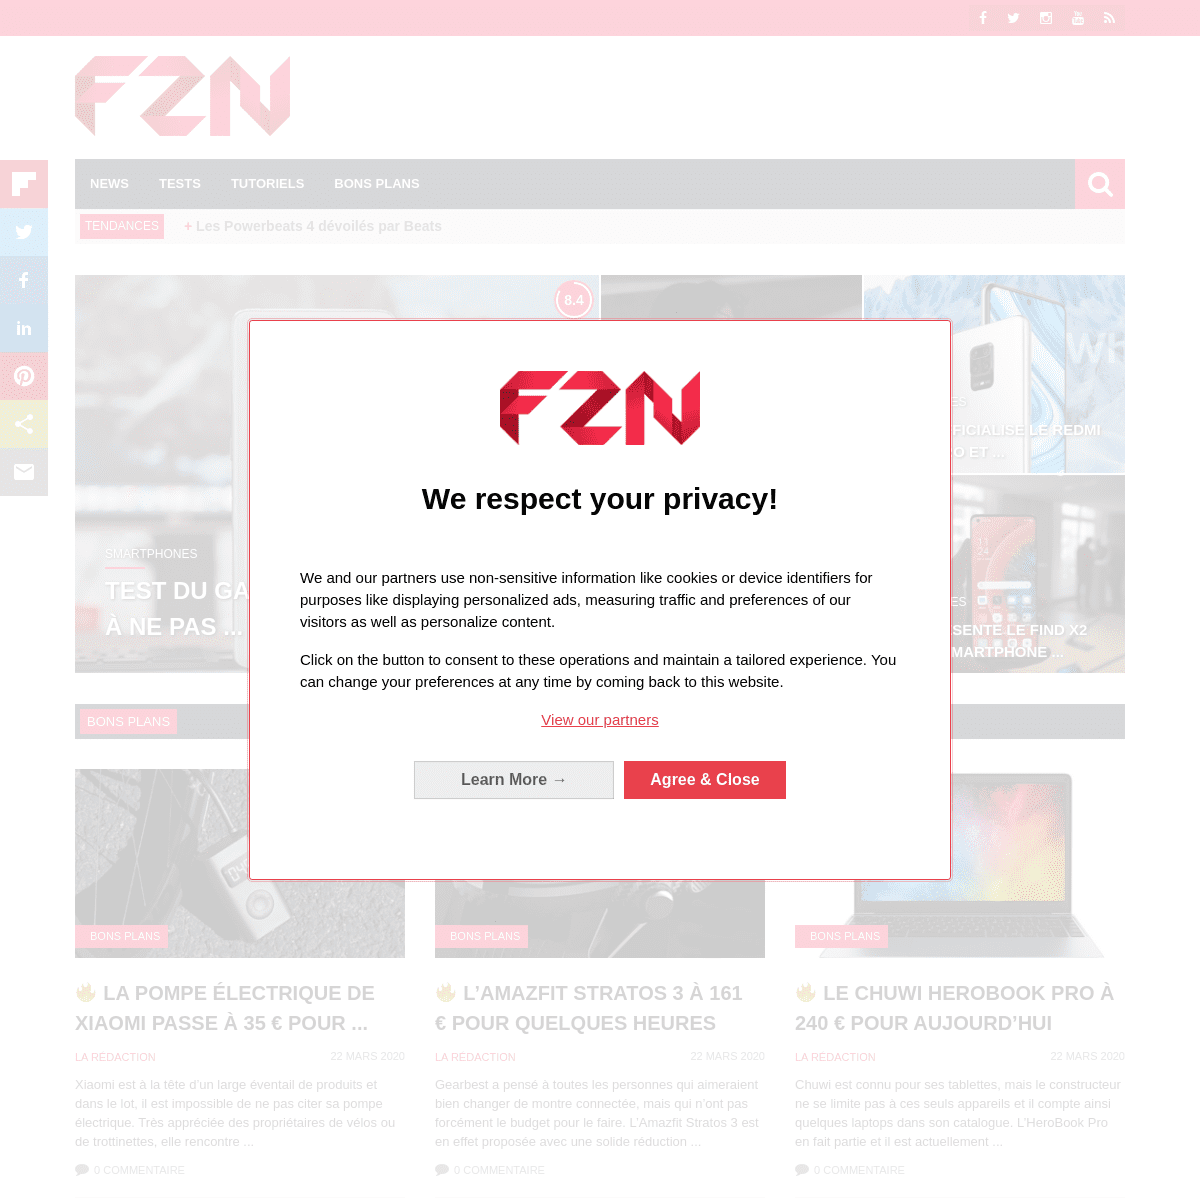 A complete backup of fredzone.org